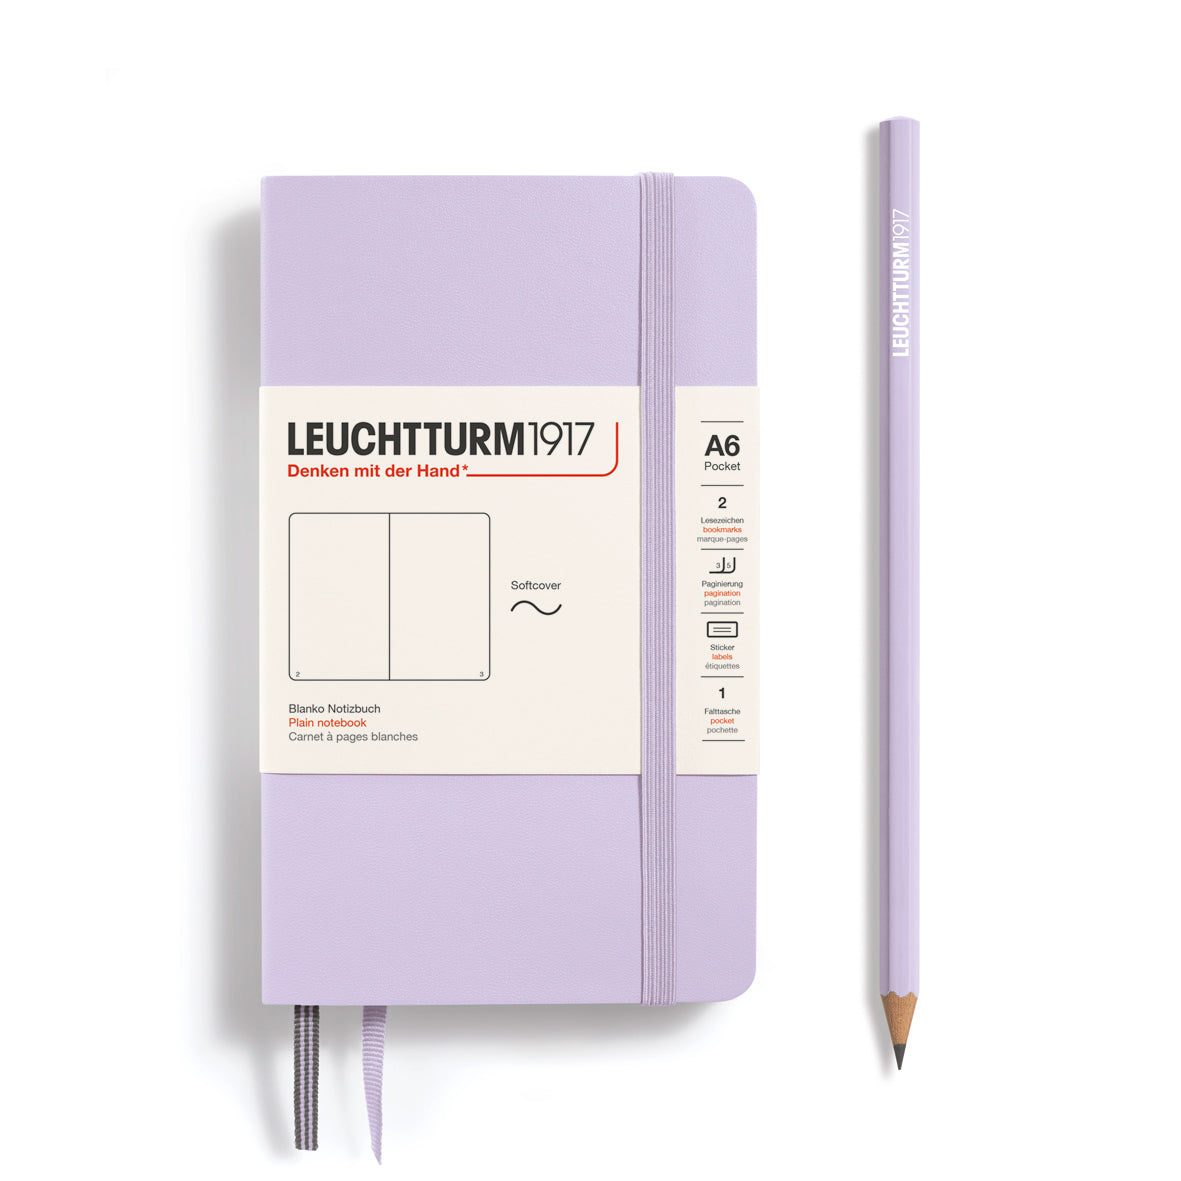 LEUCHTTURM1917 Notebook A6 Pocket Softcover in lilac and blank inside at Penny Black